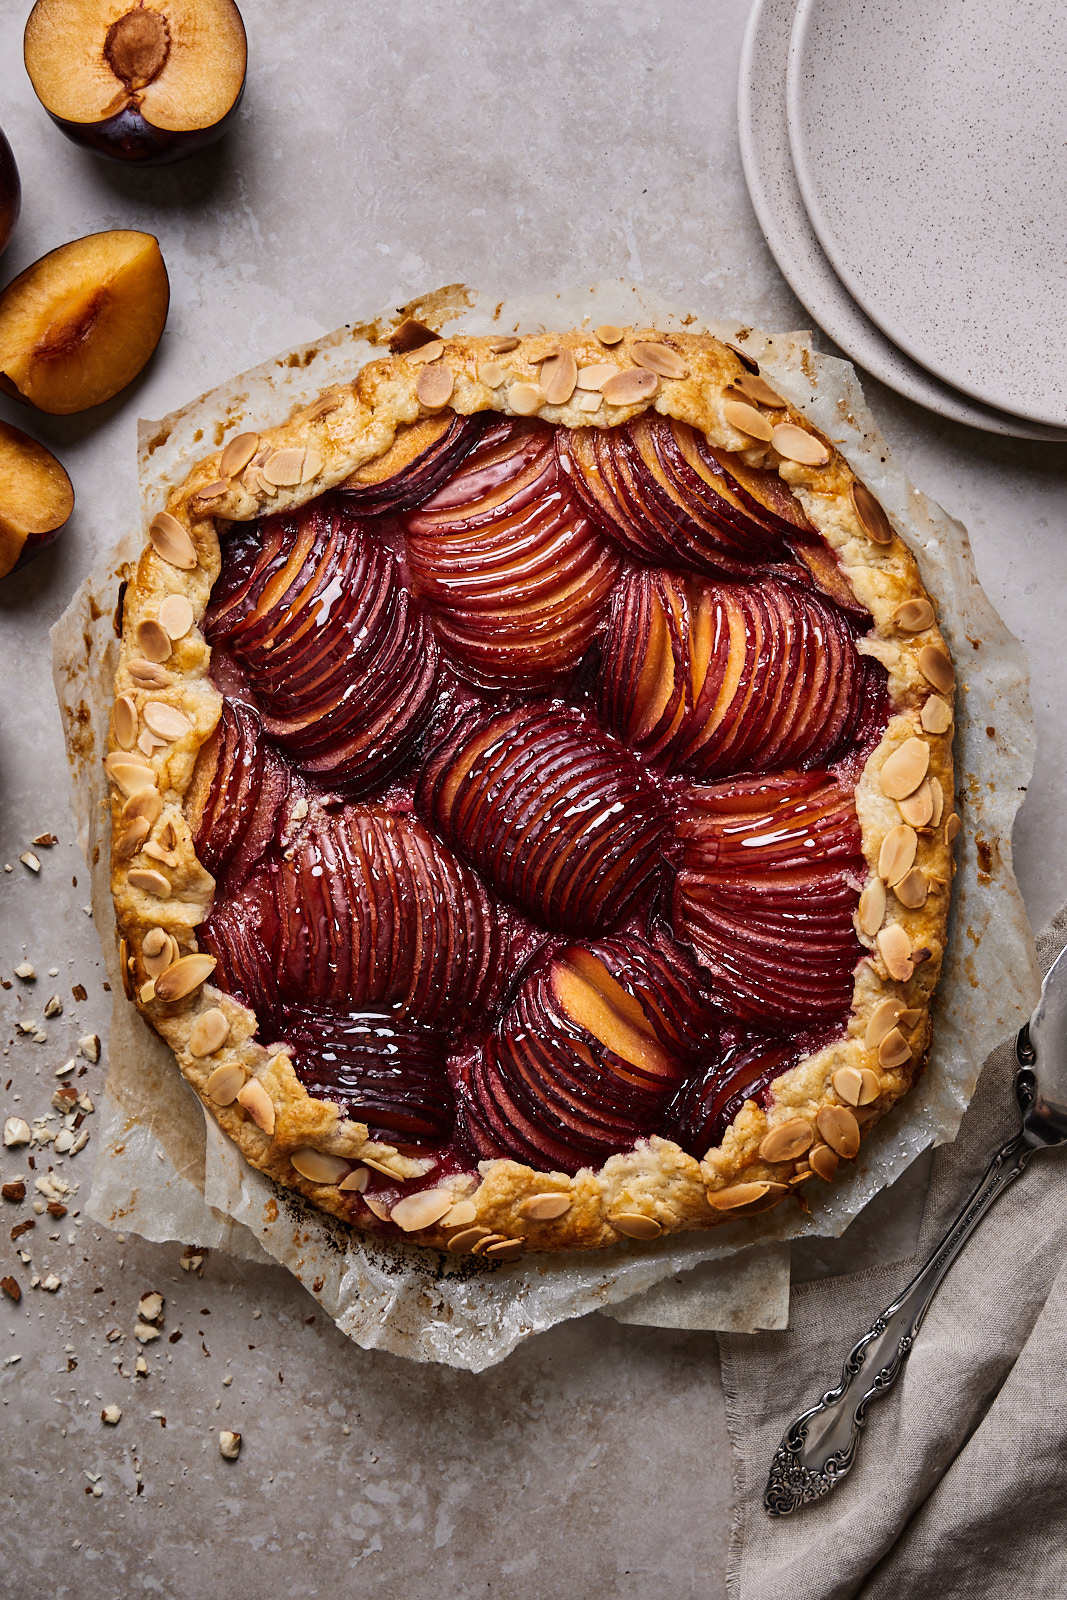 Plum and Almond Galette